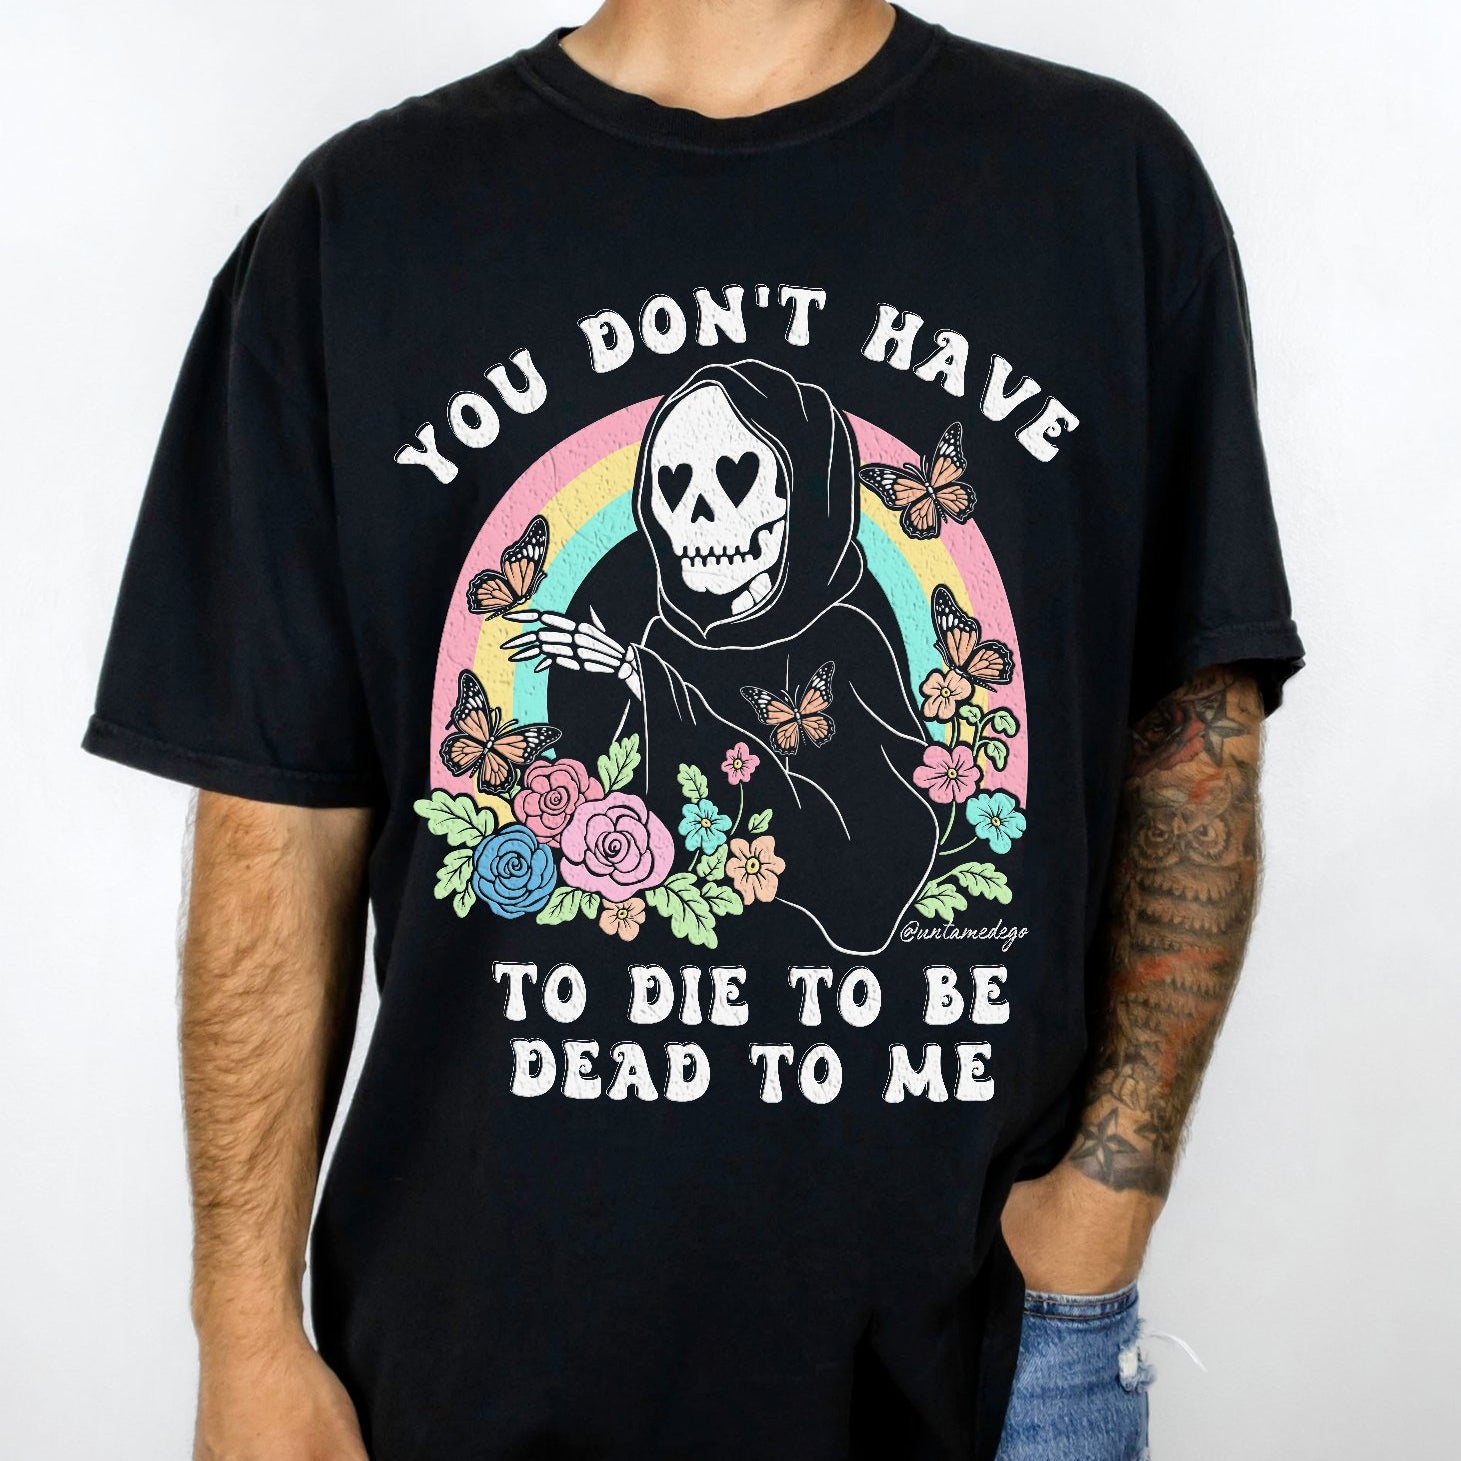 You Don't Have To Die To Be Dead To Me Mens Tee - UntamedEgo LLC.